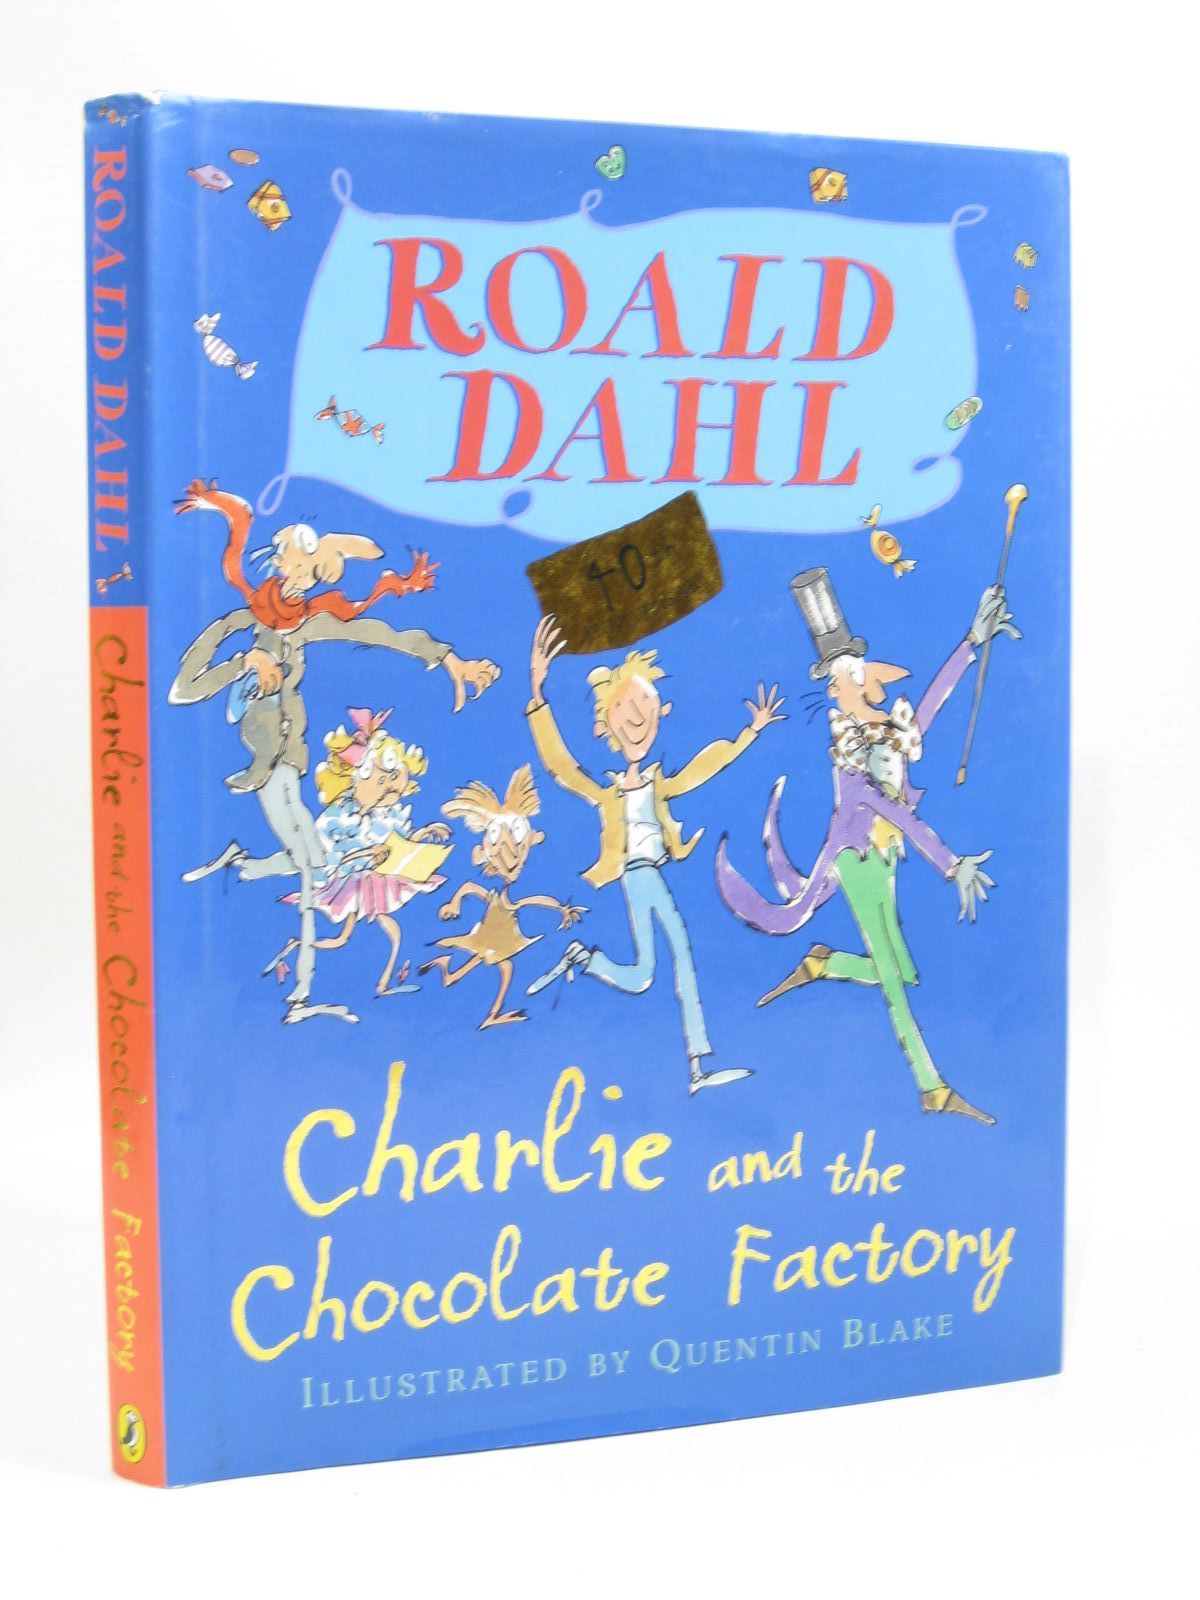 roald dahl book review charlie and the chocolate factory